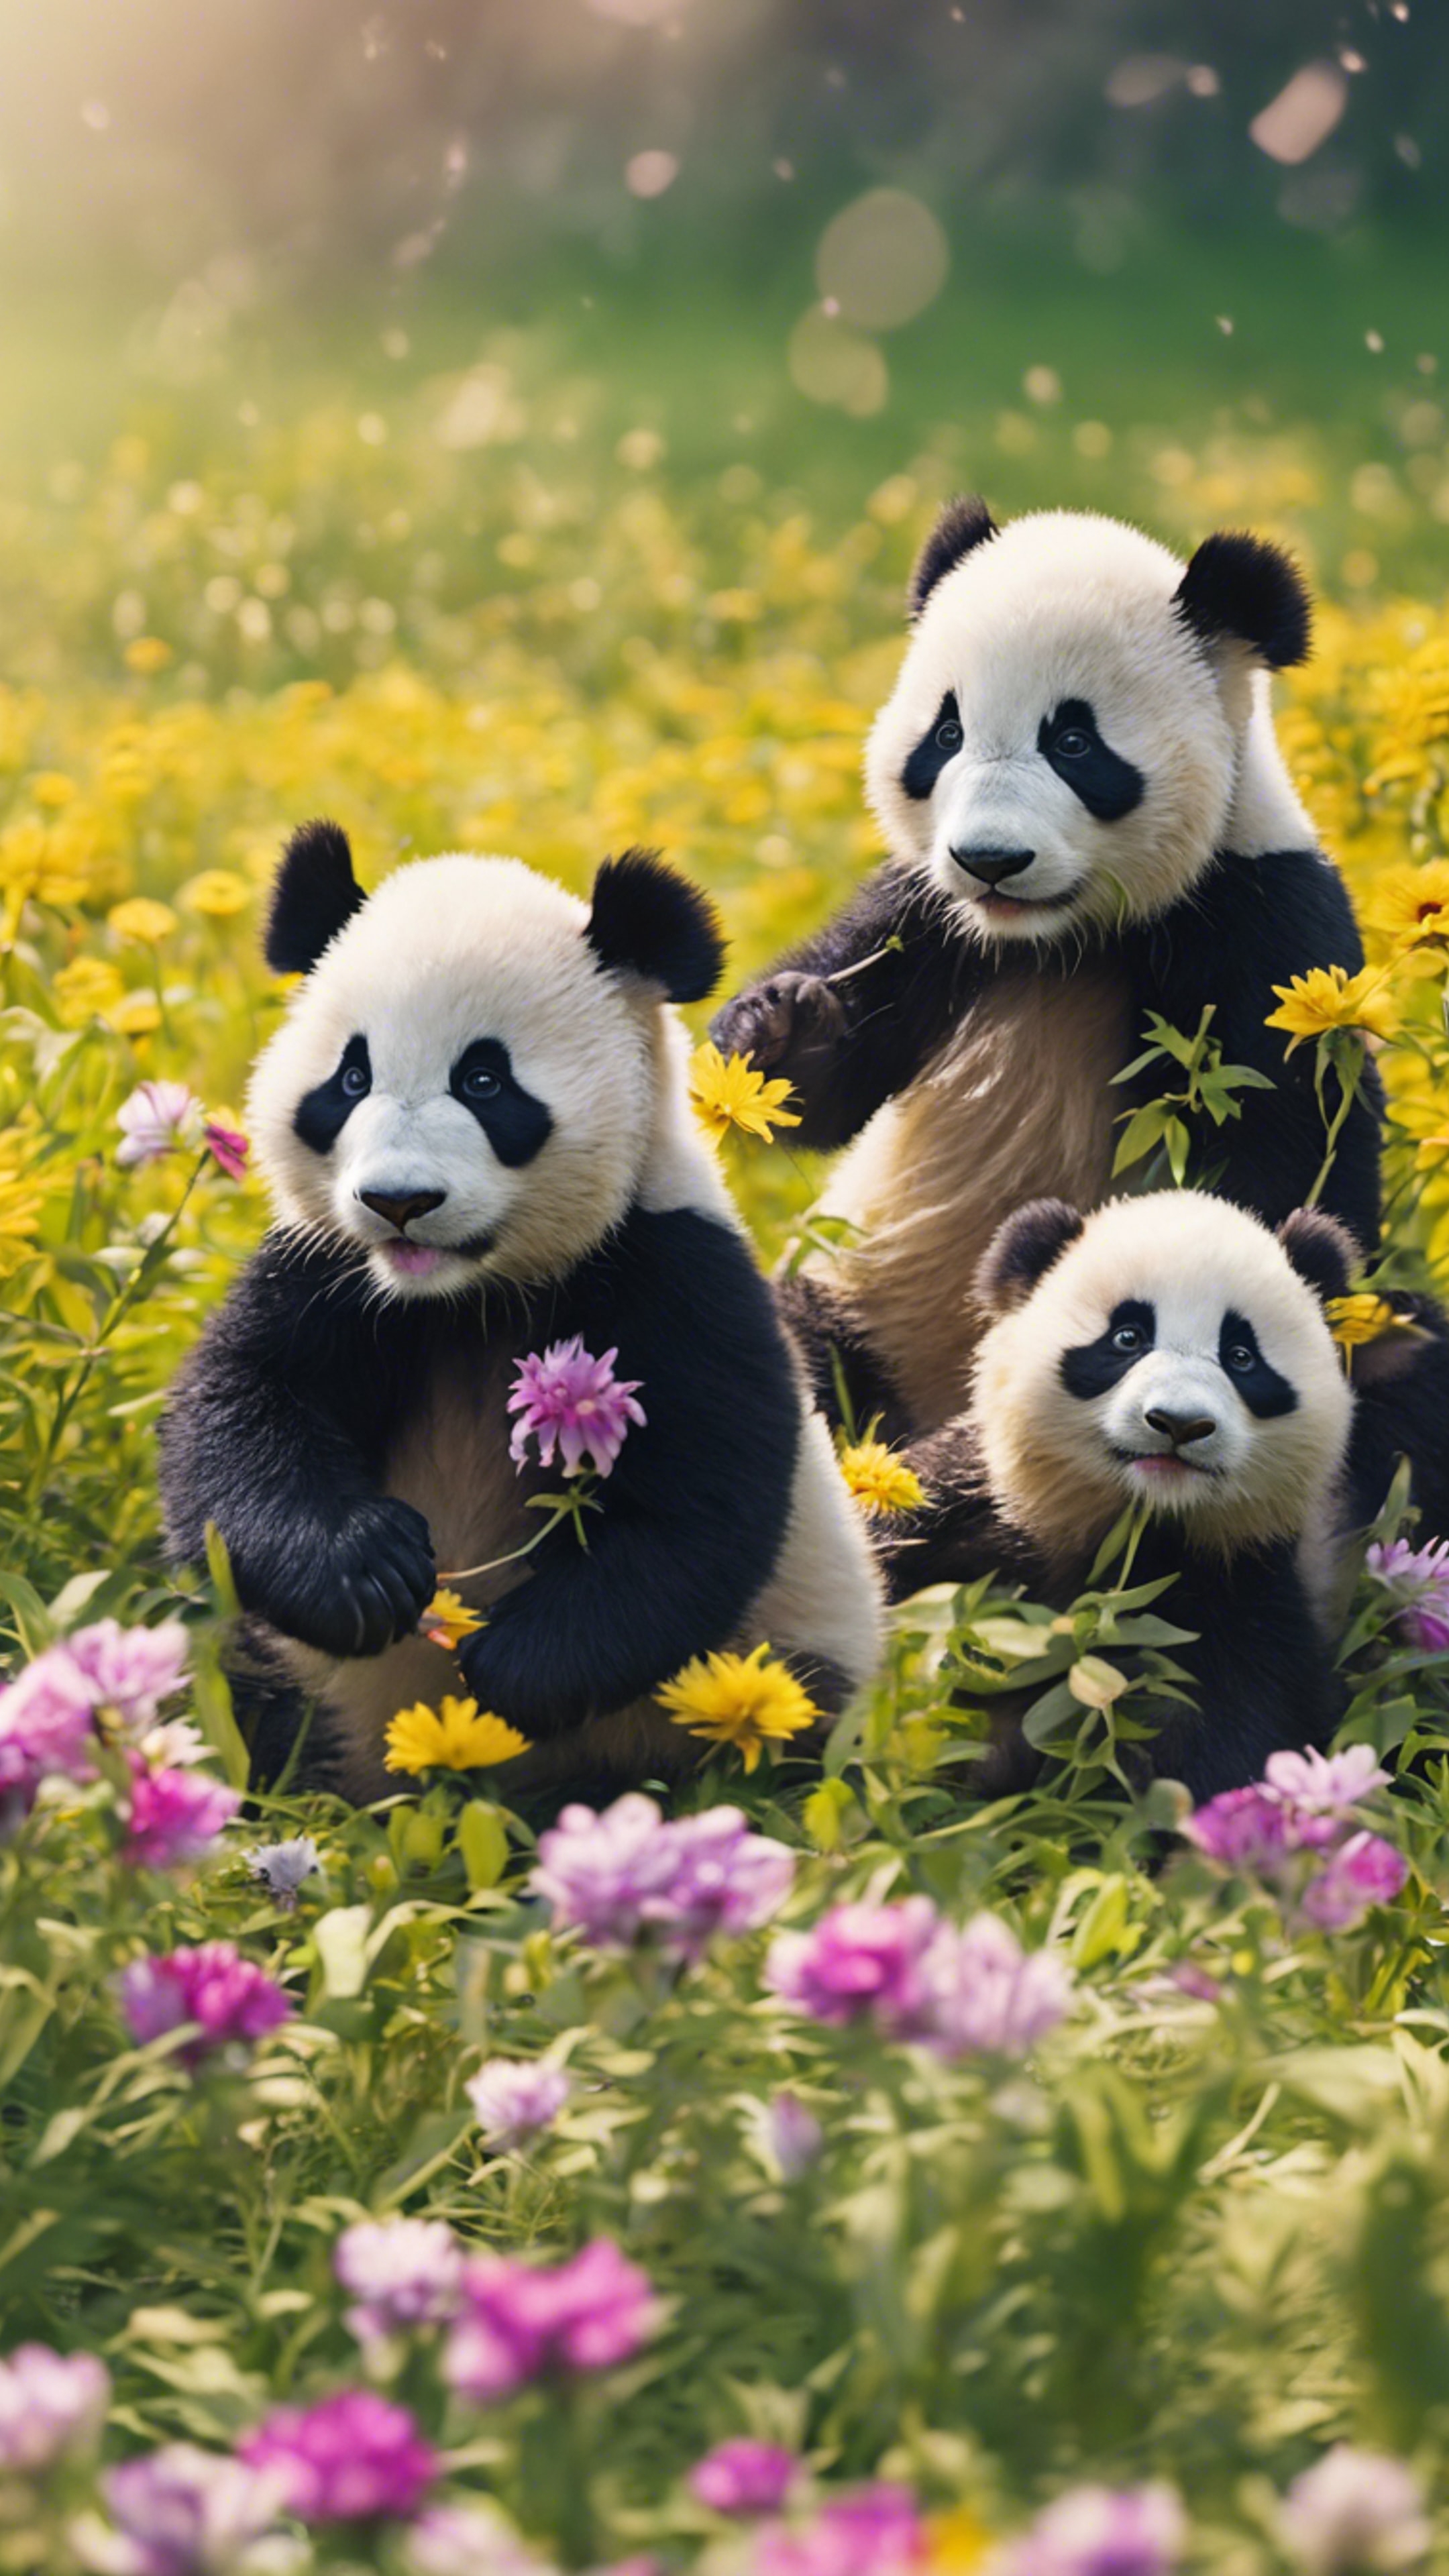 A group of lively panda cubs merrily playing tag in a field full of bright spring flowers. Ταπετσαρία[9de4fa100eef4aefa43d]